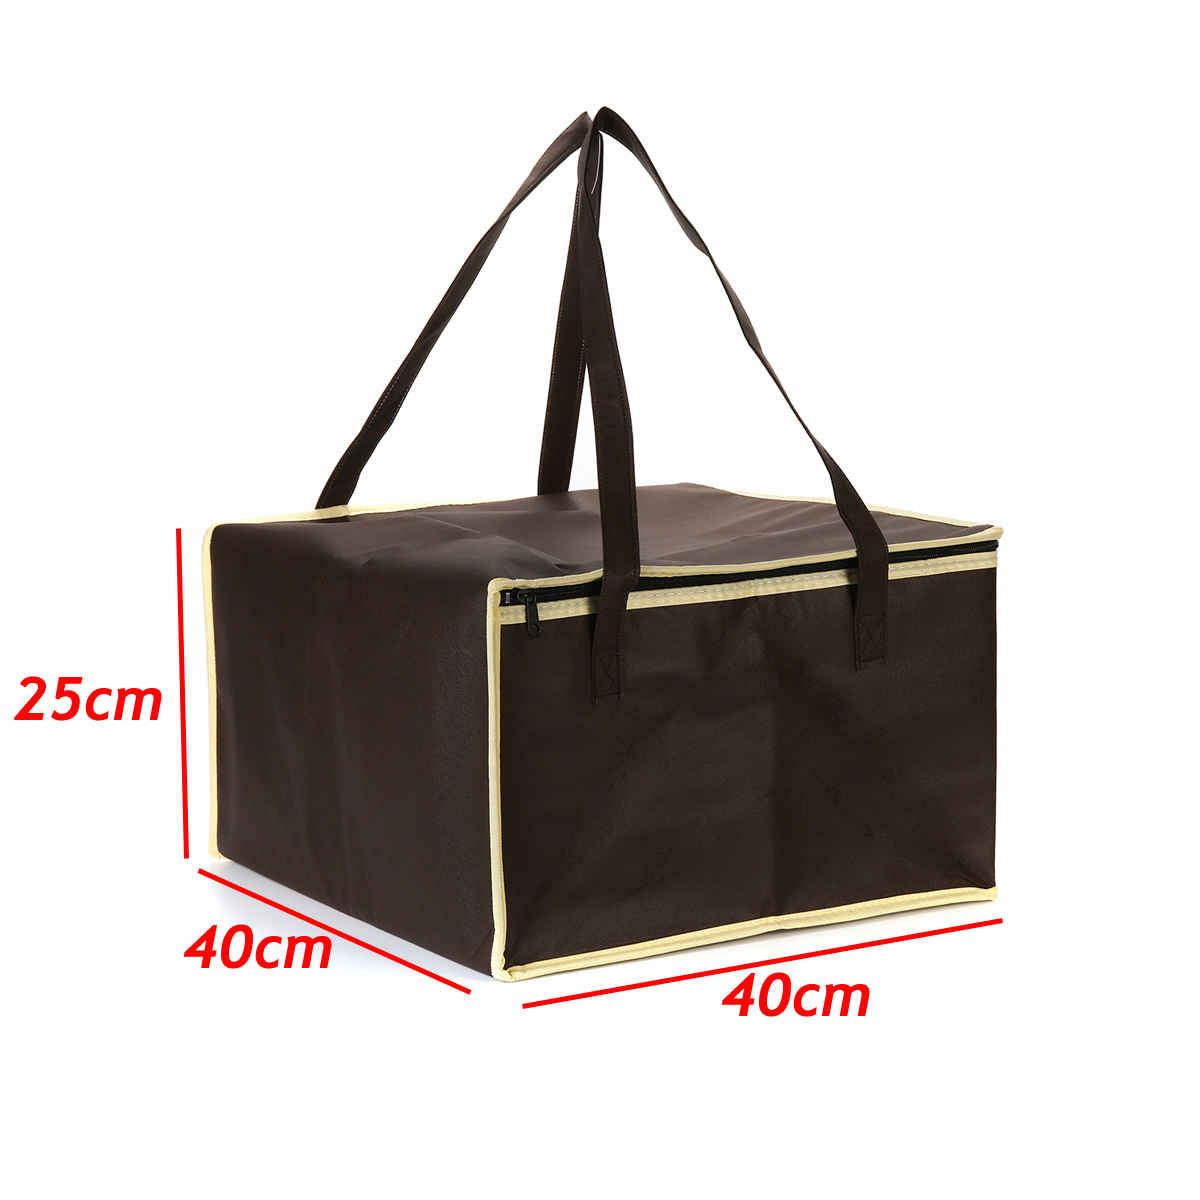 12inch-Insulated-Food-Delivery-Bag-Waterproof-Delivery-Bag-Pizza-Food-Warmer-Bag-1706936-2